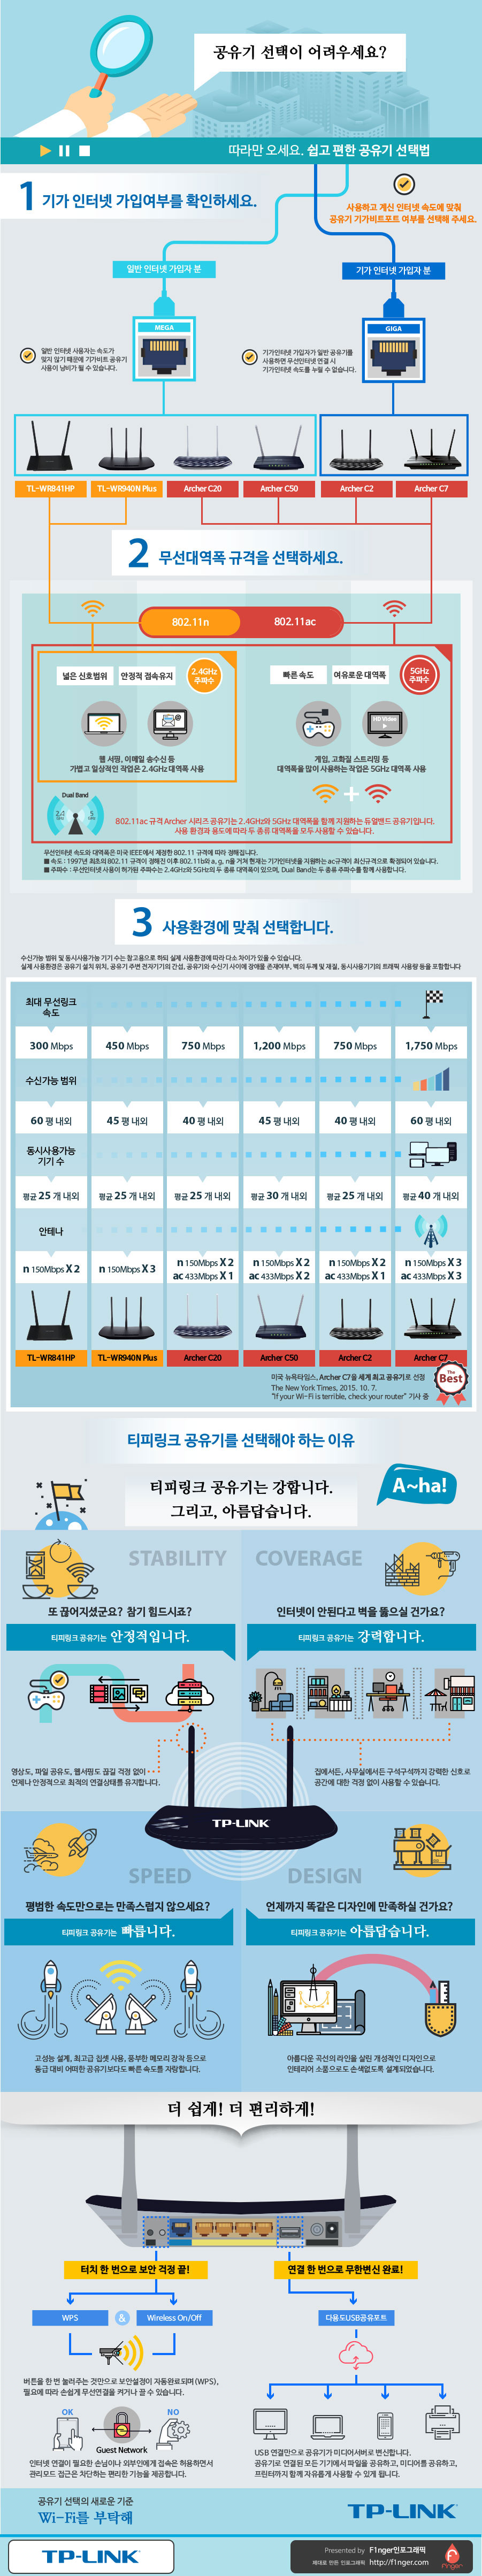 TP-Link-router-infographic_by-F1nger